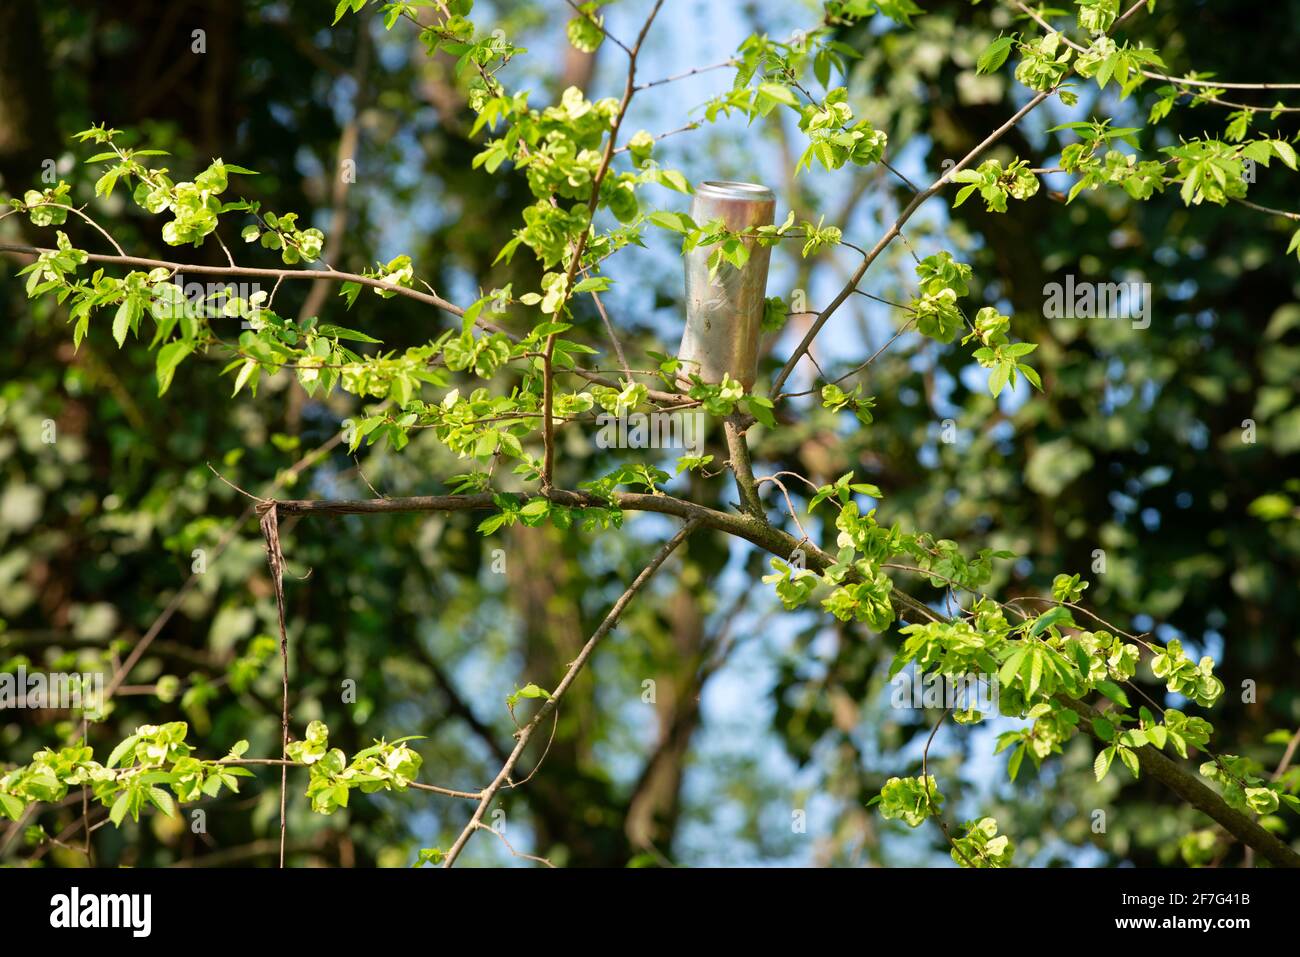 Italy, Lombardy, Coke Can Left on a Tree Branch Stock Photo